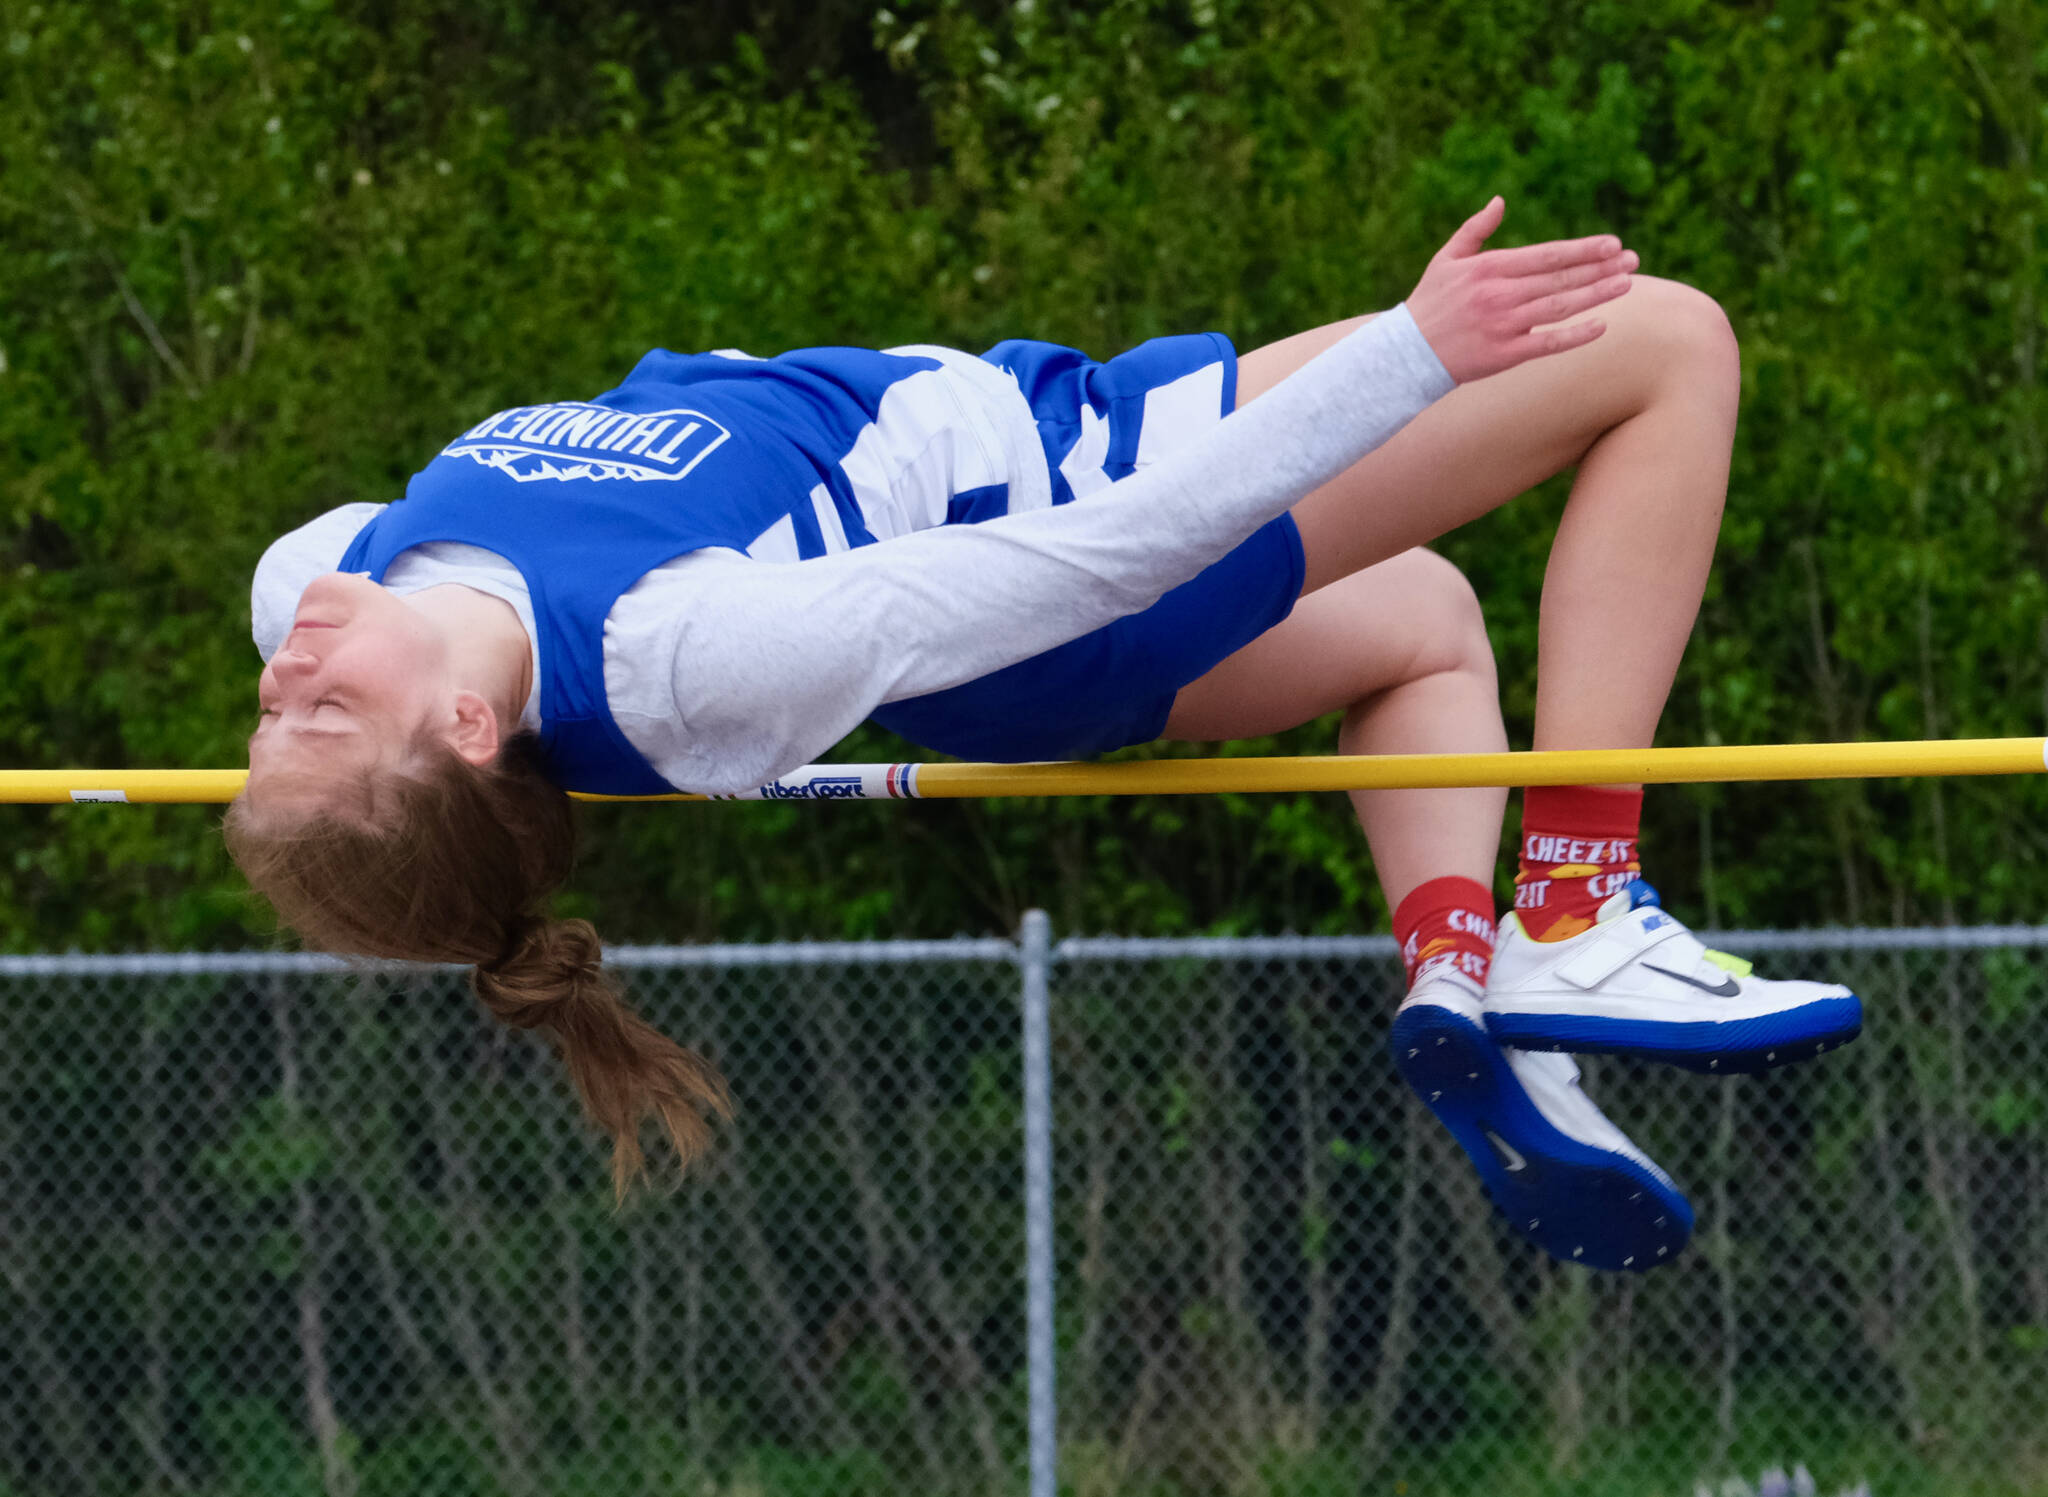 Thunder Mountain senior Mallory Welling wins the girls DI high jump during the Region V Track & Field Championships, Friday, at Thunder Mountain. The championships resume Saturday. (Klas Stolpe / Juneau Empire)